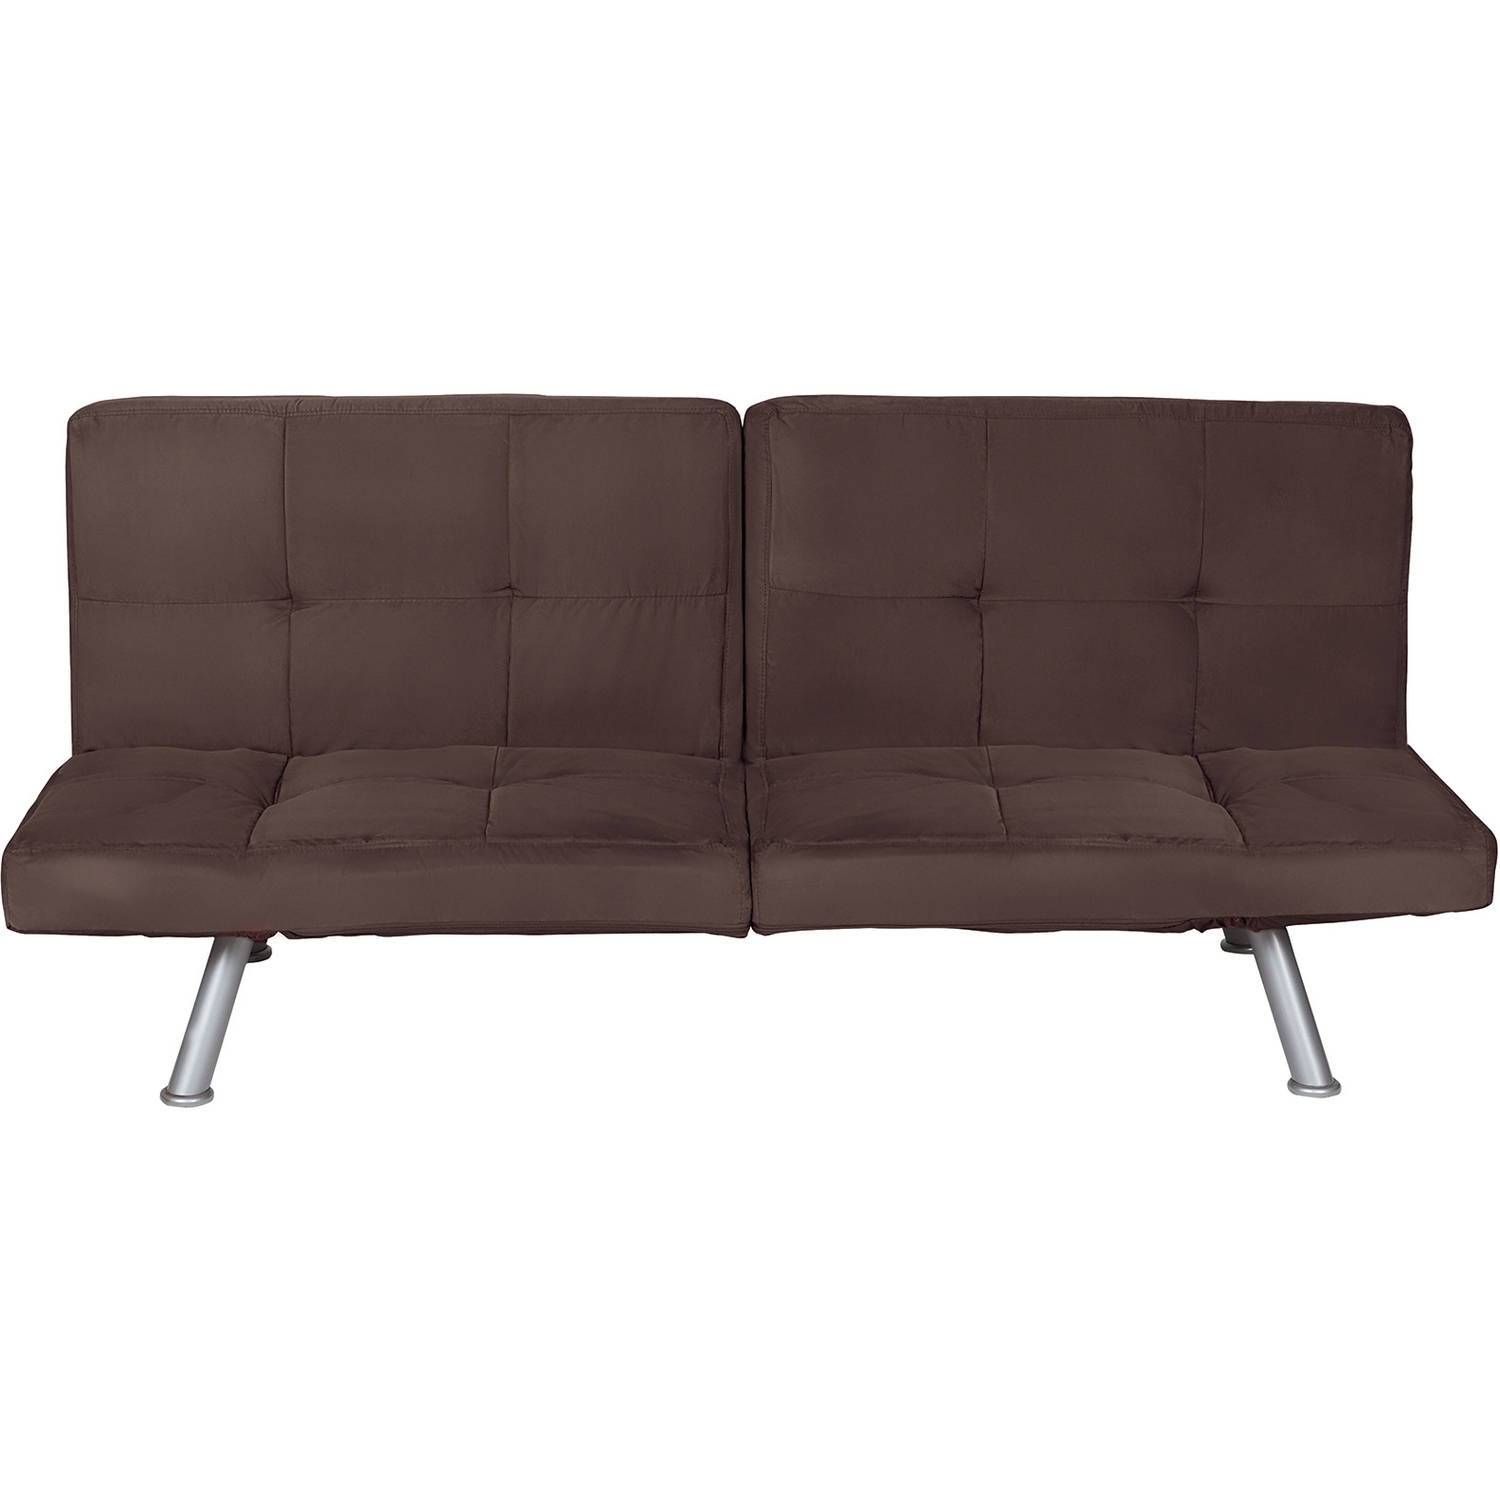 Mainstays Contempo Futon, Multiple Colors – Walmart With Regard To Mainstays Contempo Futon Sofa Beds (View 2 of 15)